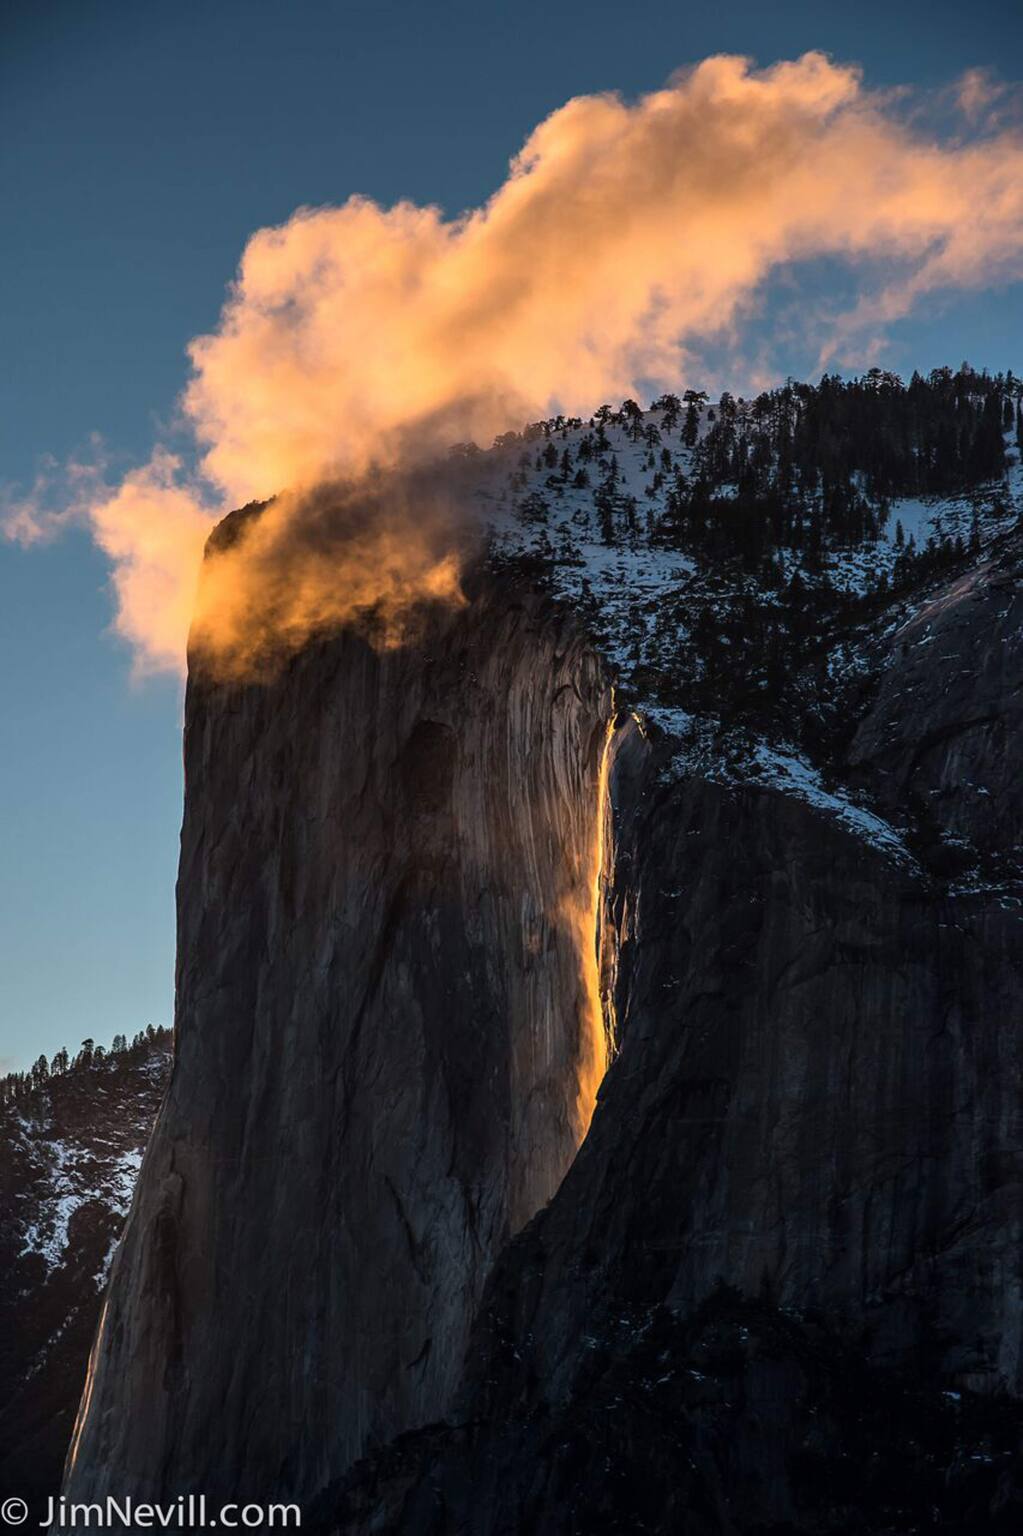 An amazing fire-toned cloud sits over El Capitan in Yosemite on the evening of February 18, when the light of the setting sun hit Horsetail Fall at just the right angle, creating a firefall that glowed orange and red.